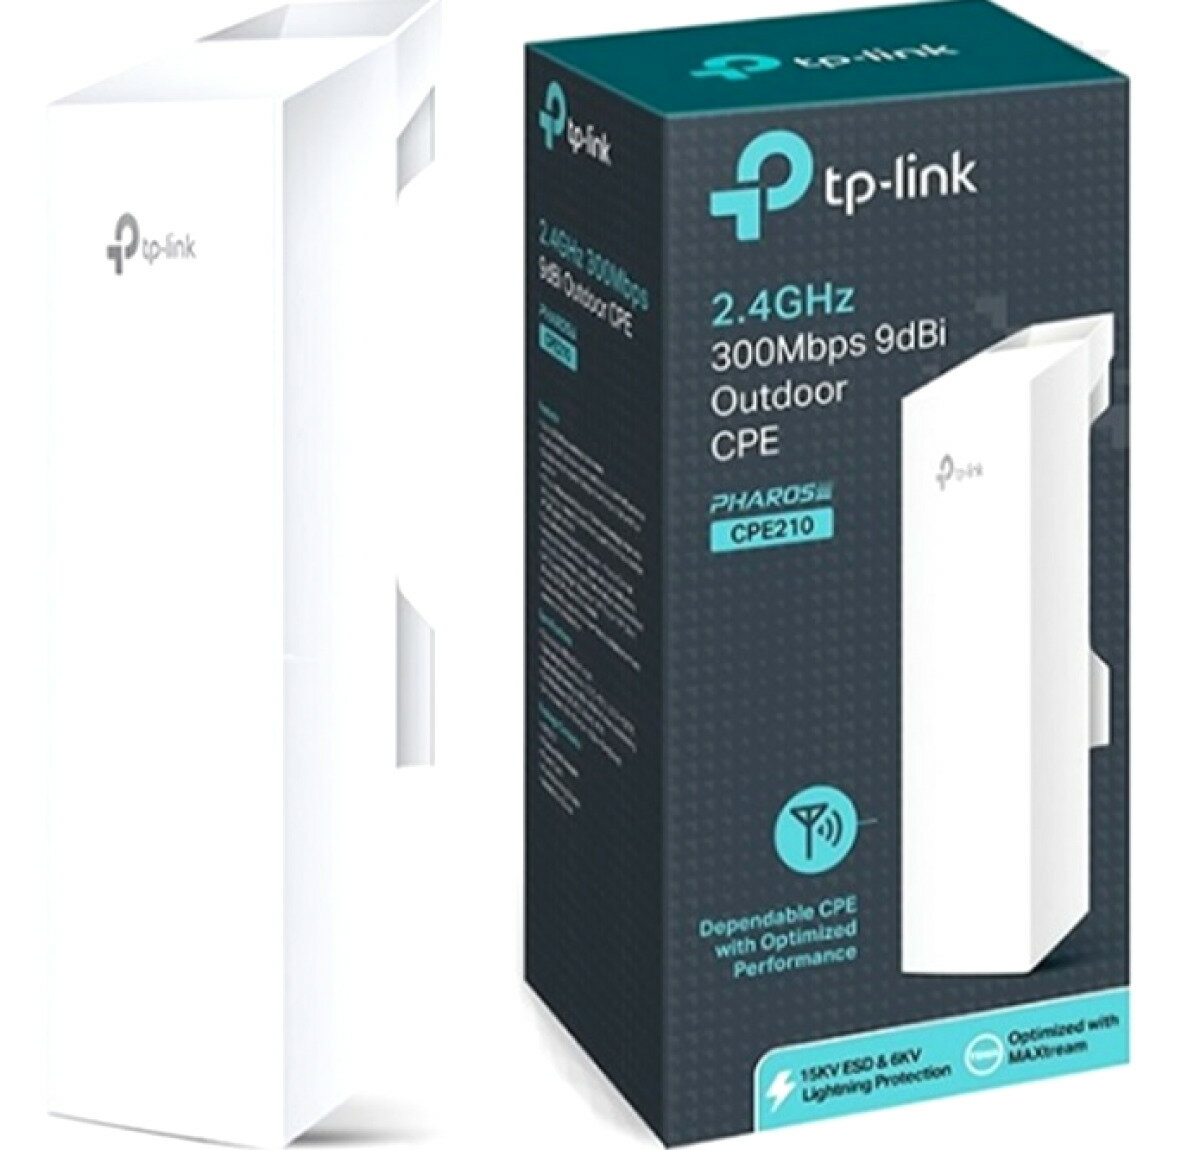 tp-link 2.4Ghz 300Mbps 9dBi Outdoor CPE845973071677